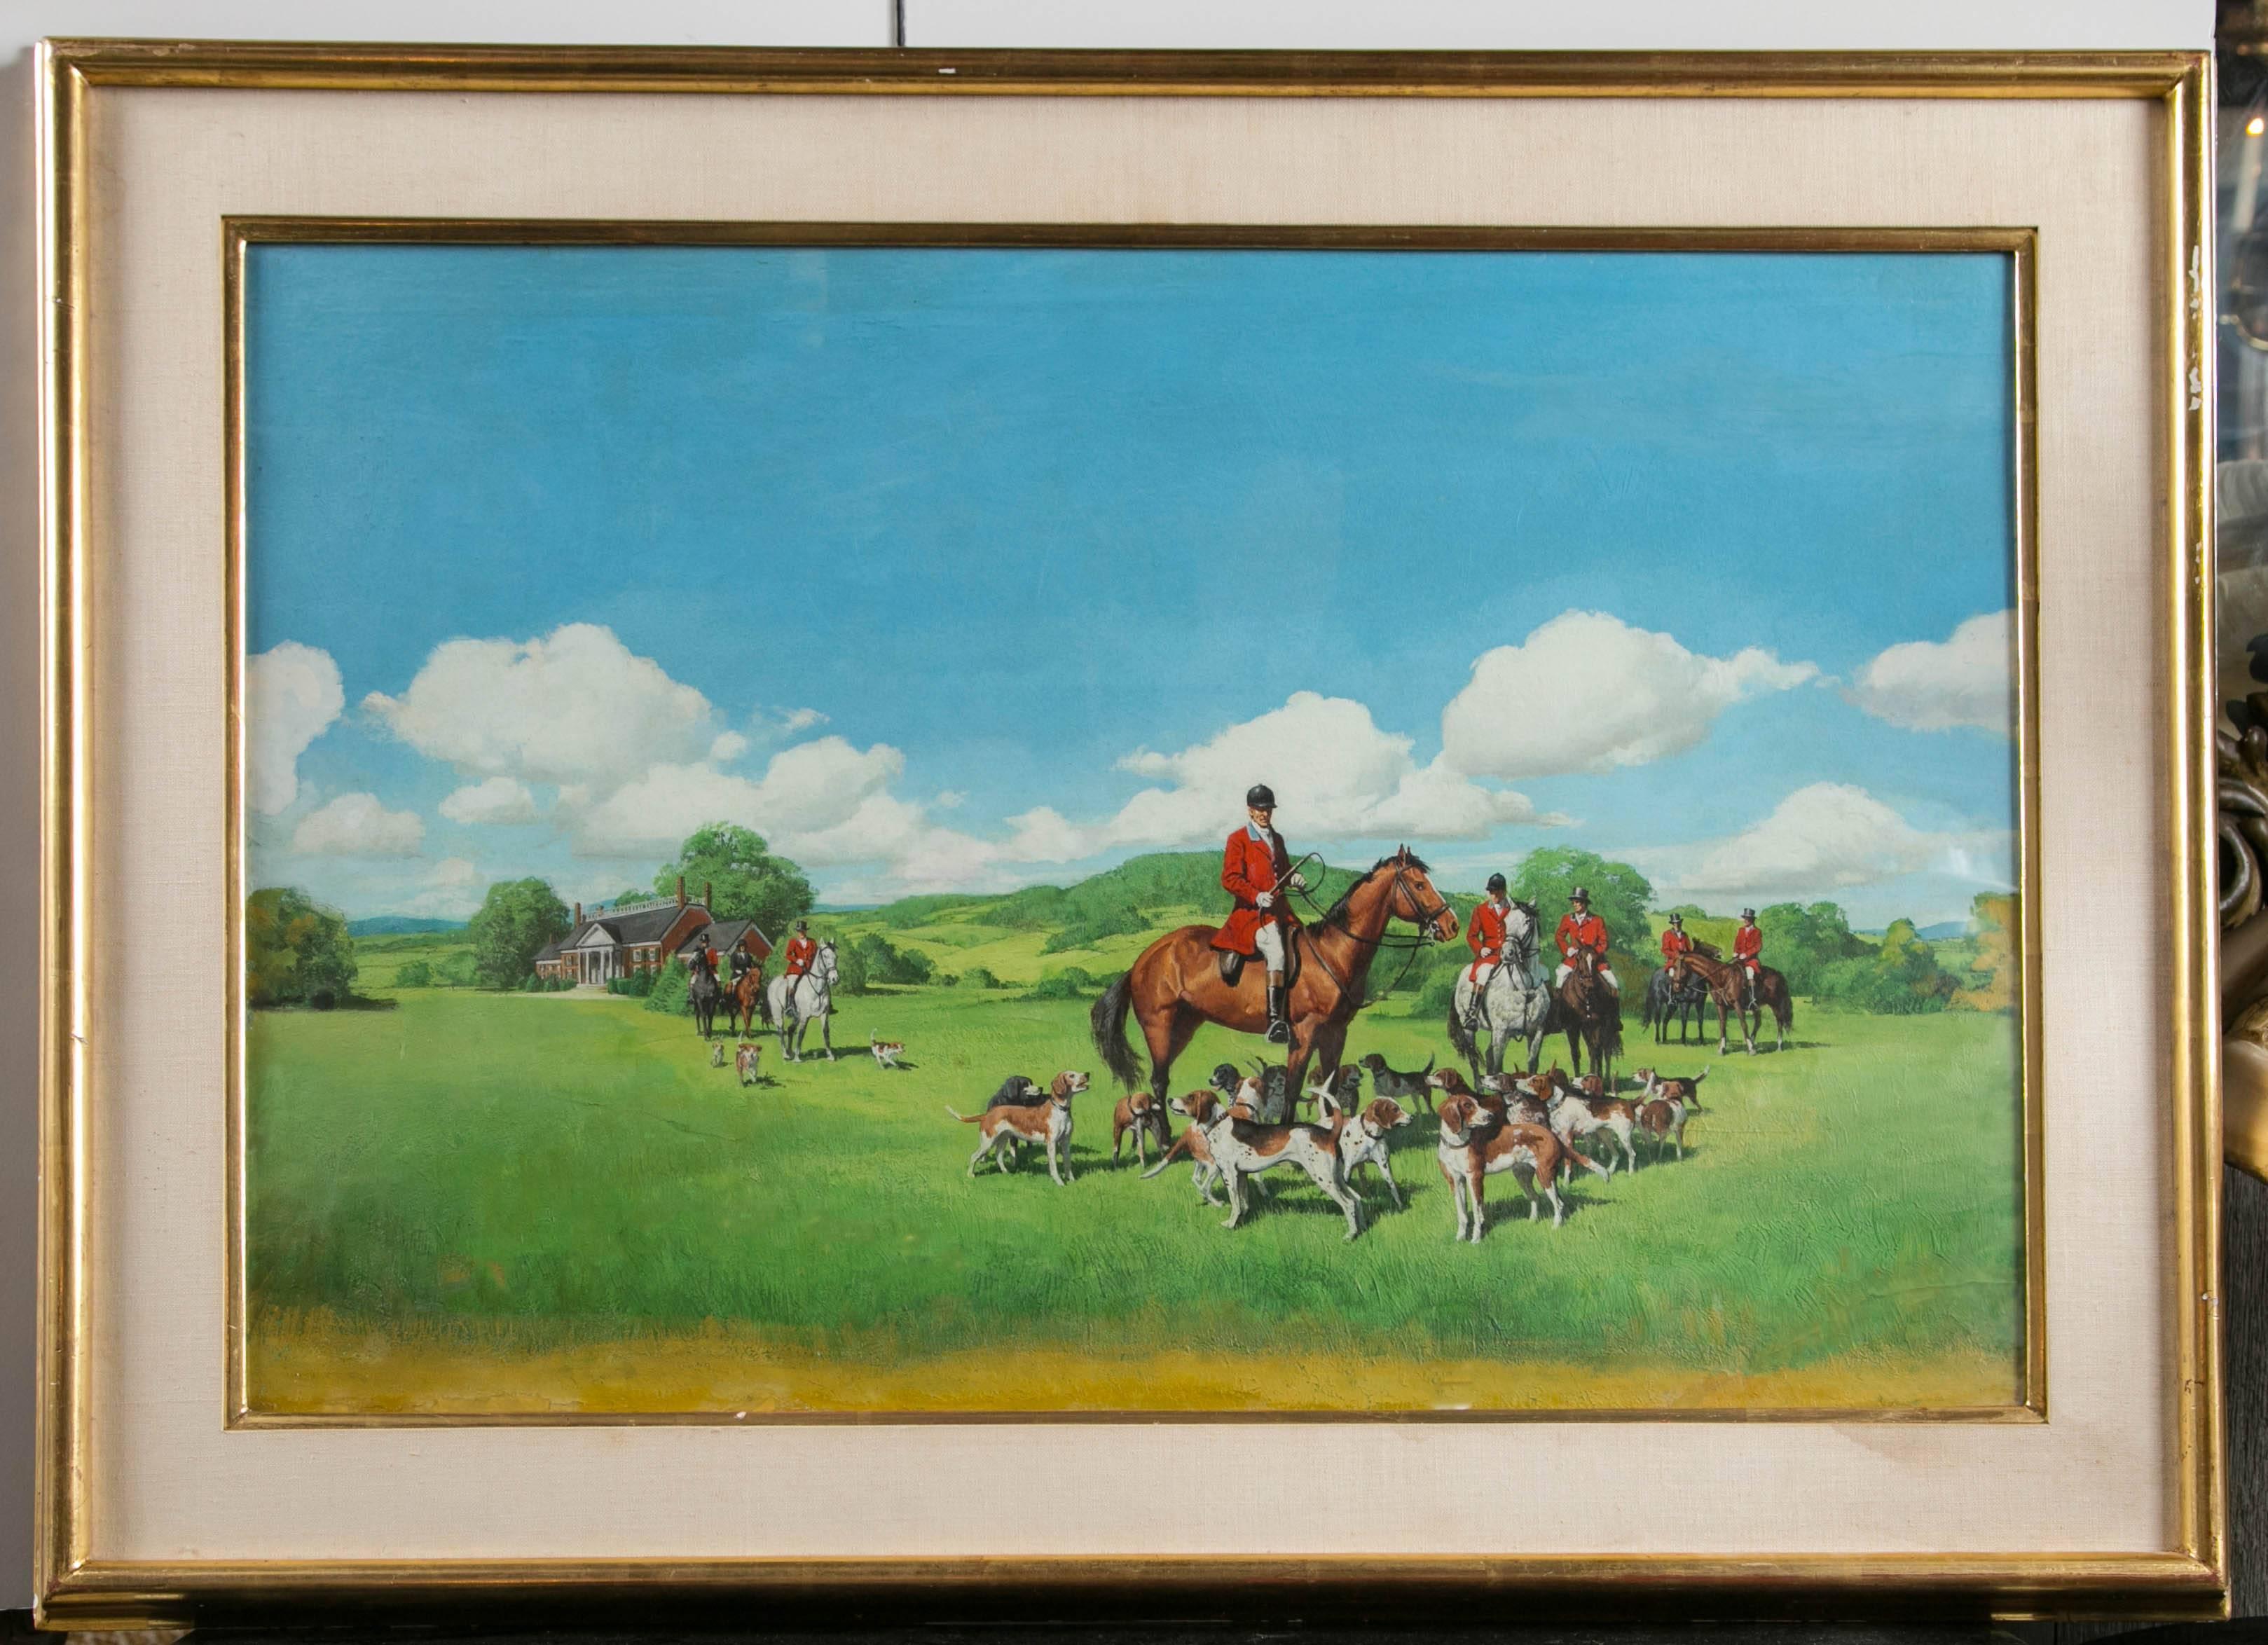 A number of hounds and the hunters on horseback await the call to the hunt. Beautiful colonnaded home in the pasture. Bright green and yellows grasses and trees under a bright blue sky with white clouds. Paper on artists board. Unsigned. Restored